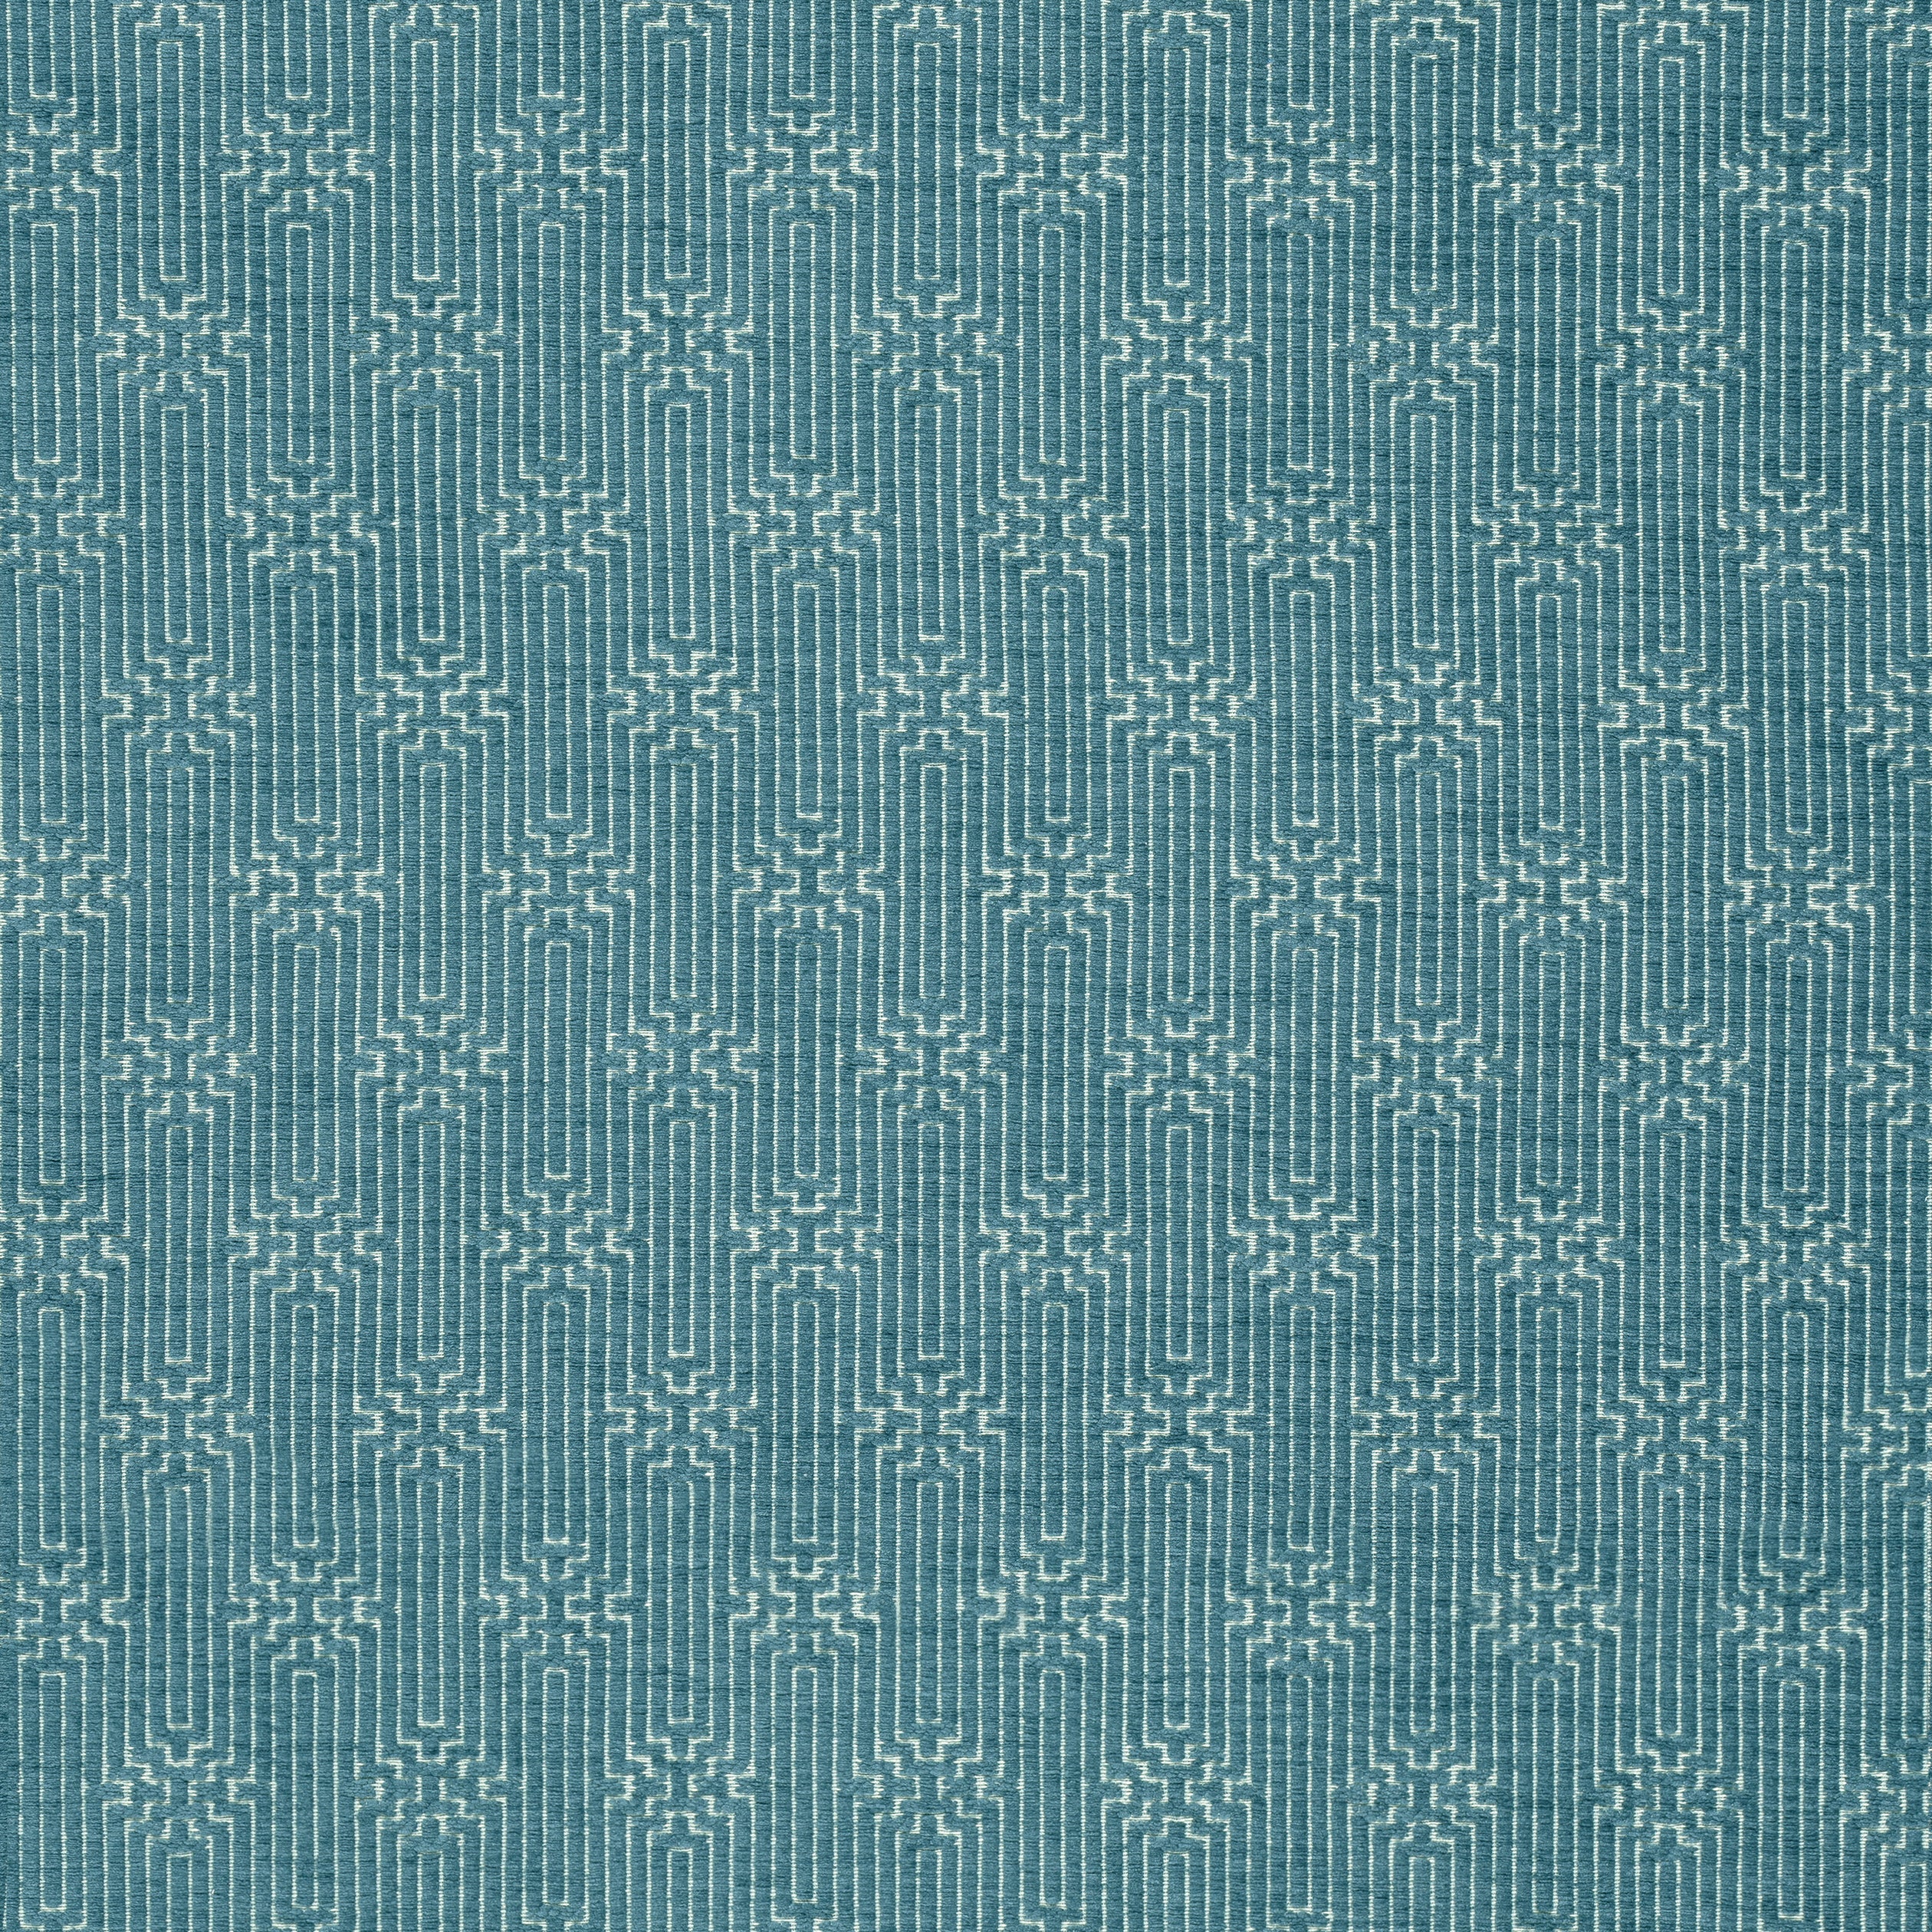 Crete fabric in peacock color - pattern number W74212 - by Thibaut in the Passage collection